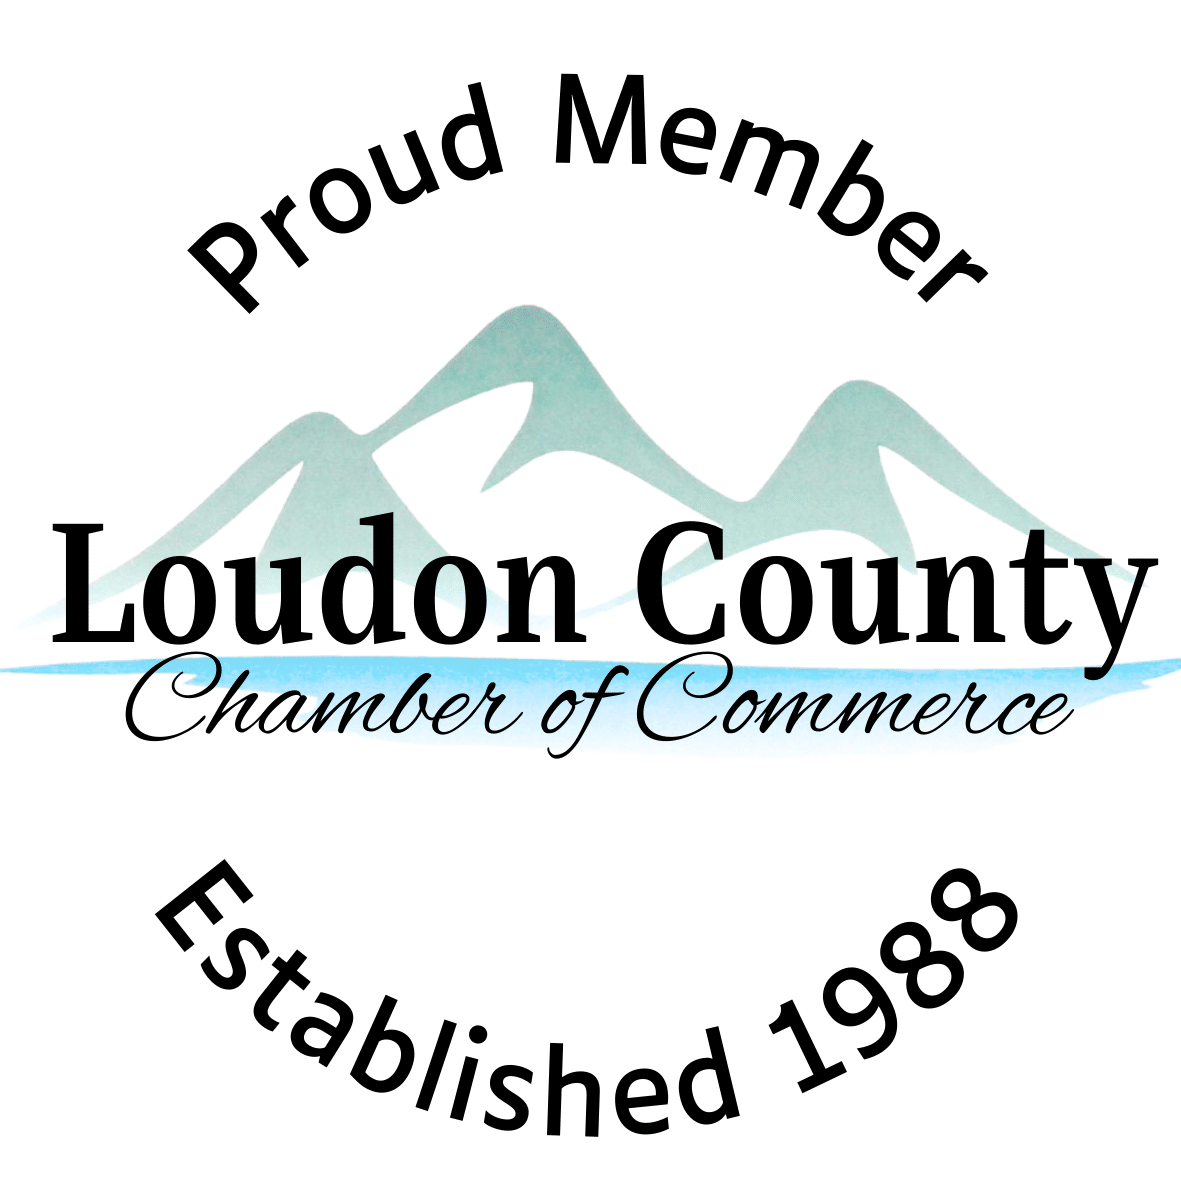 Loudon County Chamber of Commerce badge - Proud Member - Established 1988